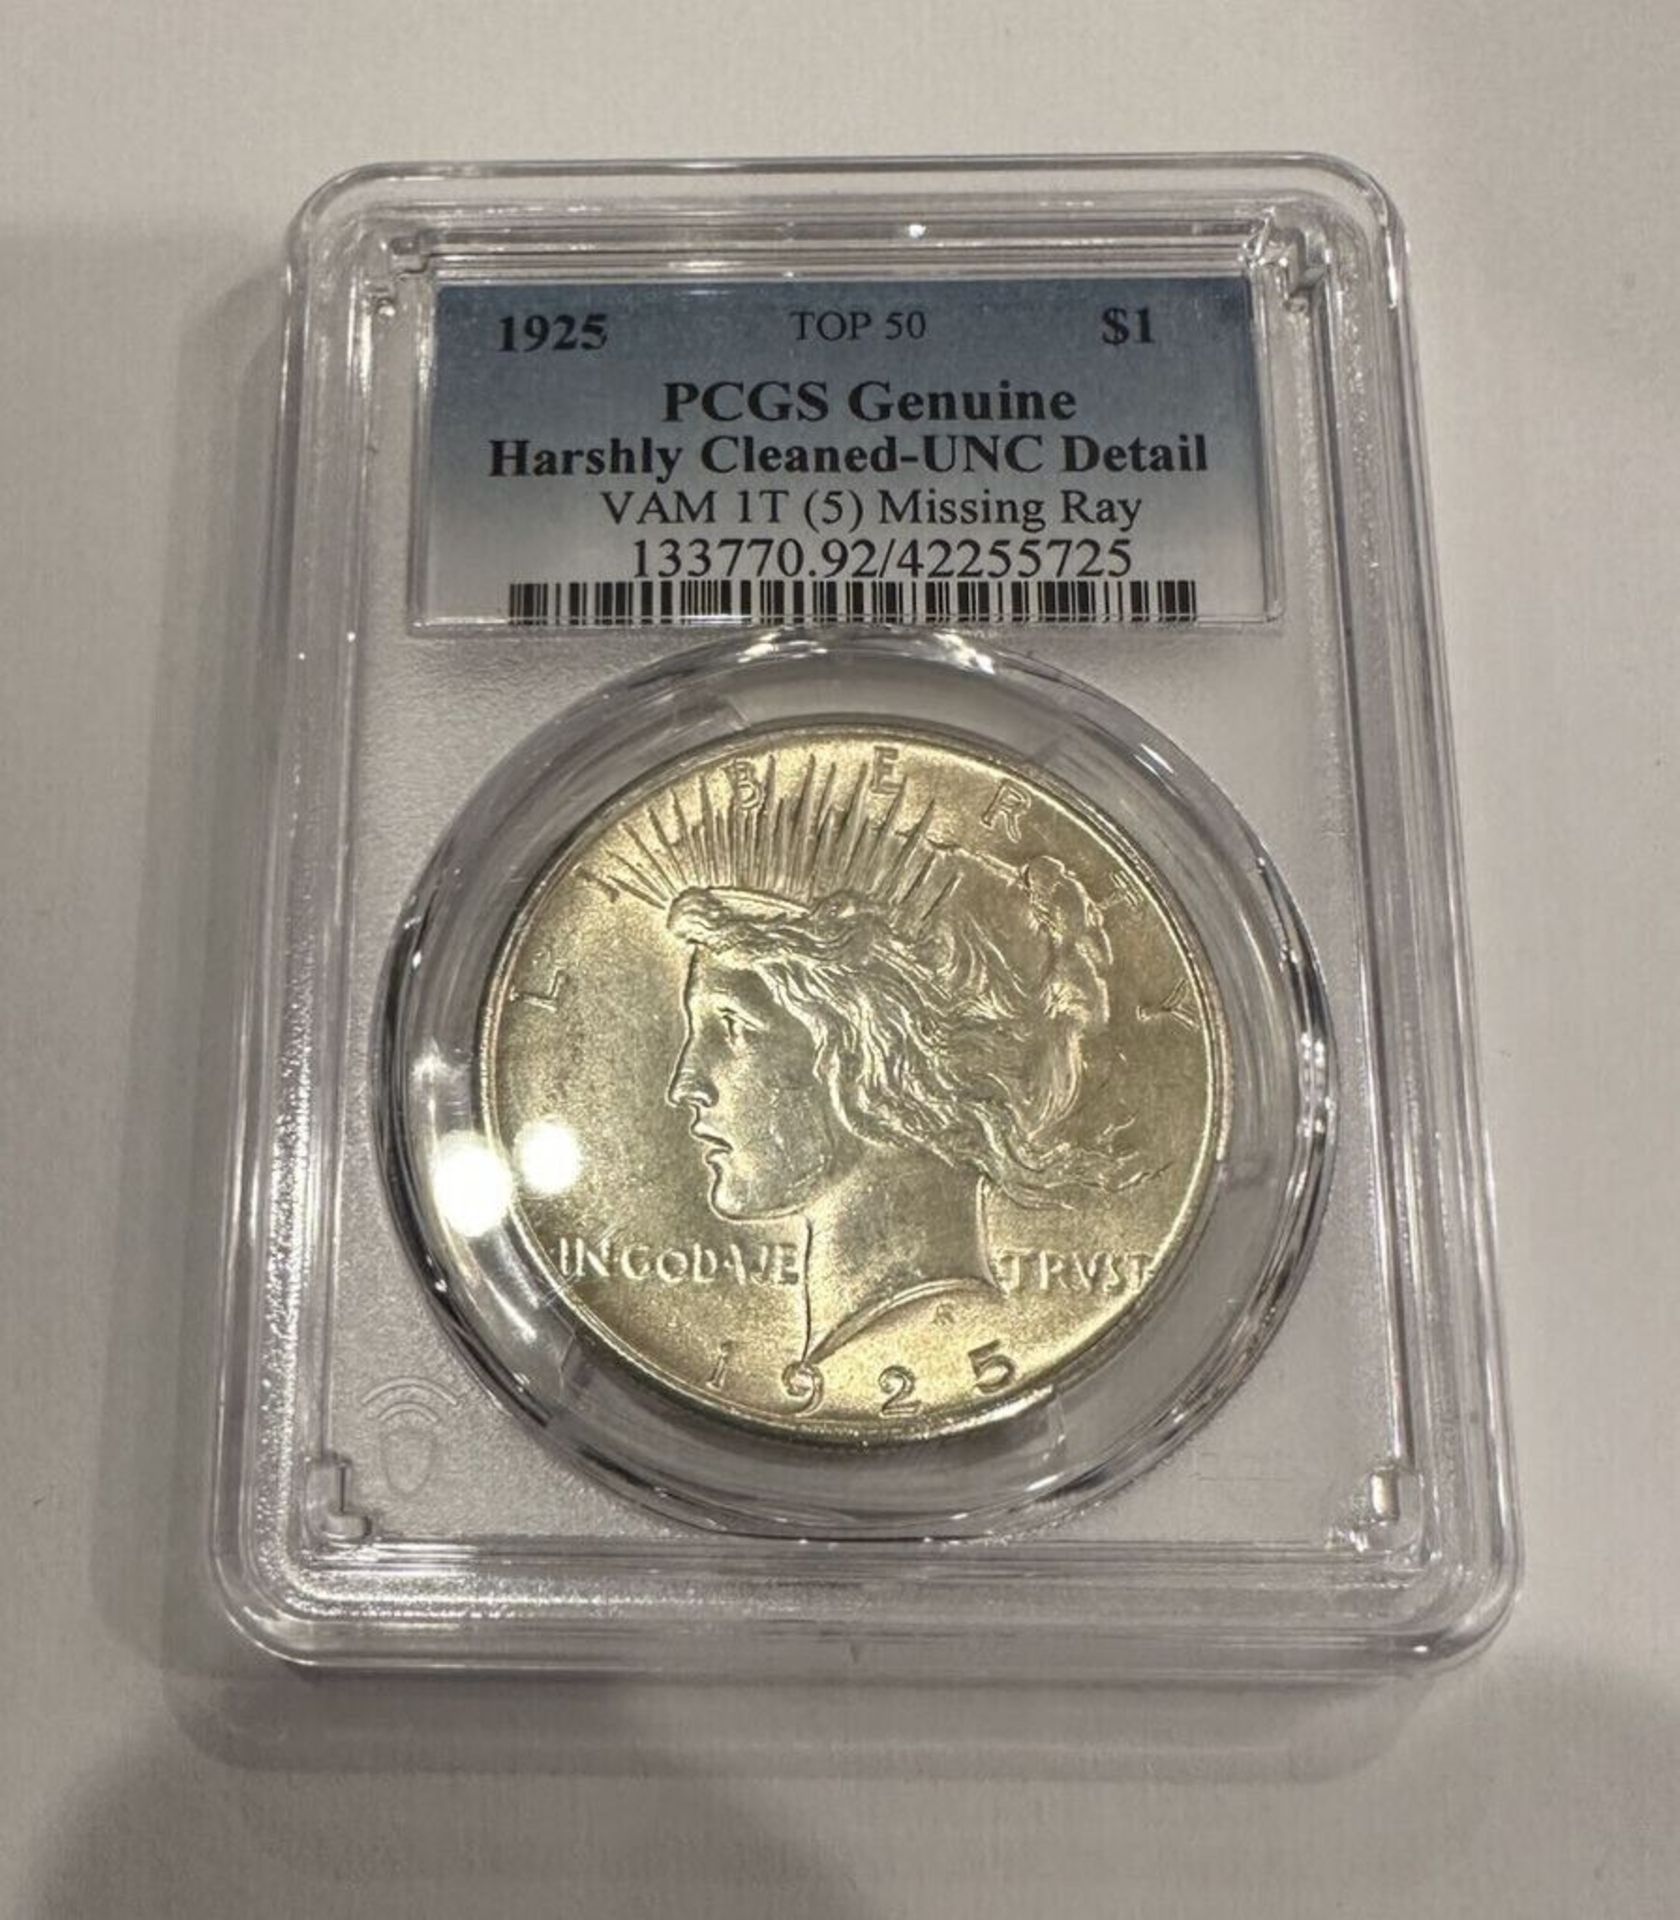 1925 $1 PCGS GENUINE HARSHLY CLEANED-UNC DETAIL COIN